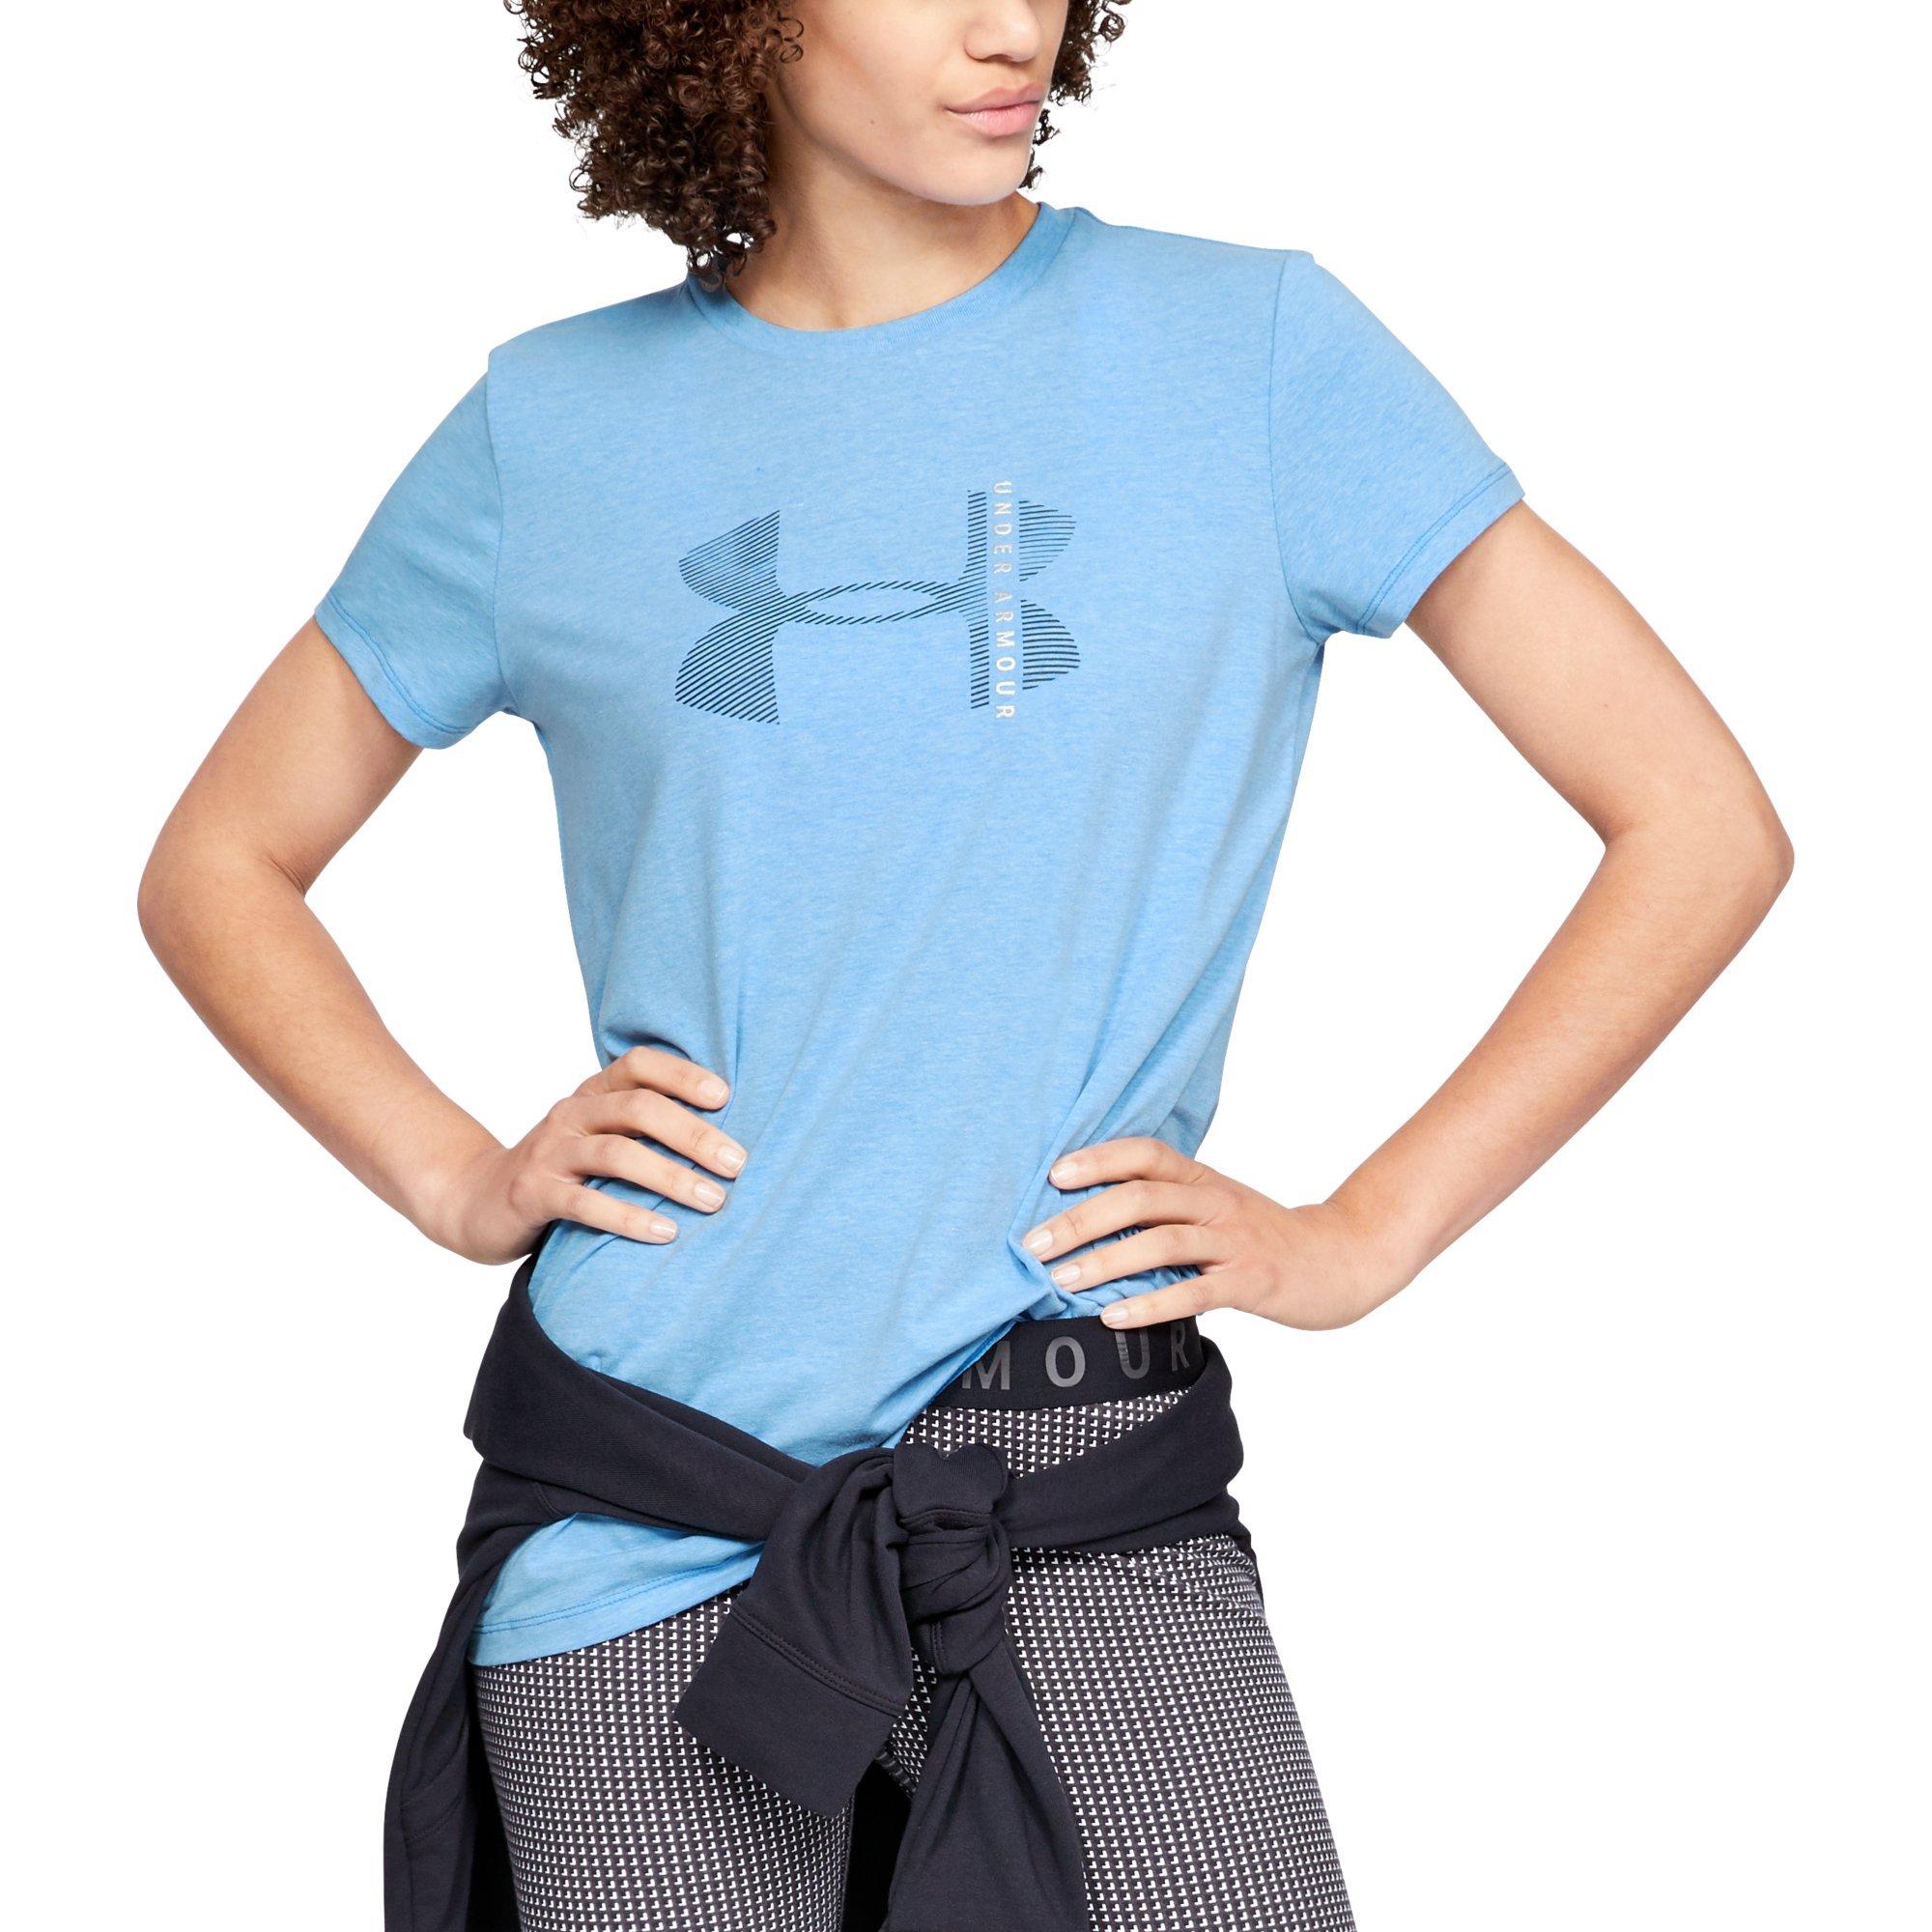 under armour classic tee womens